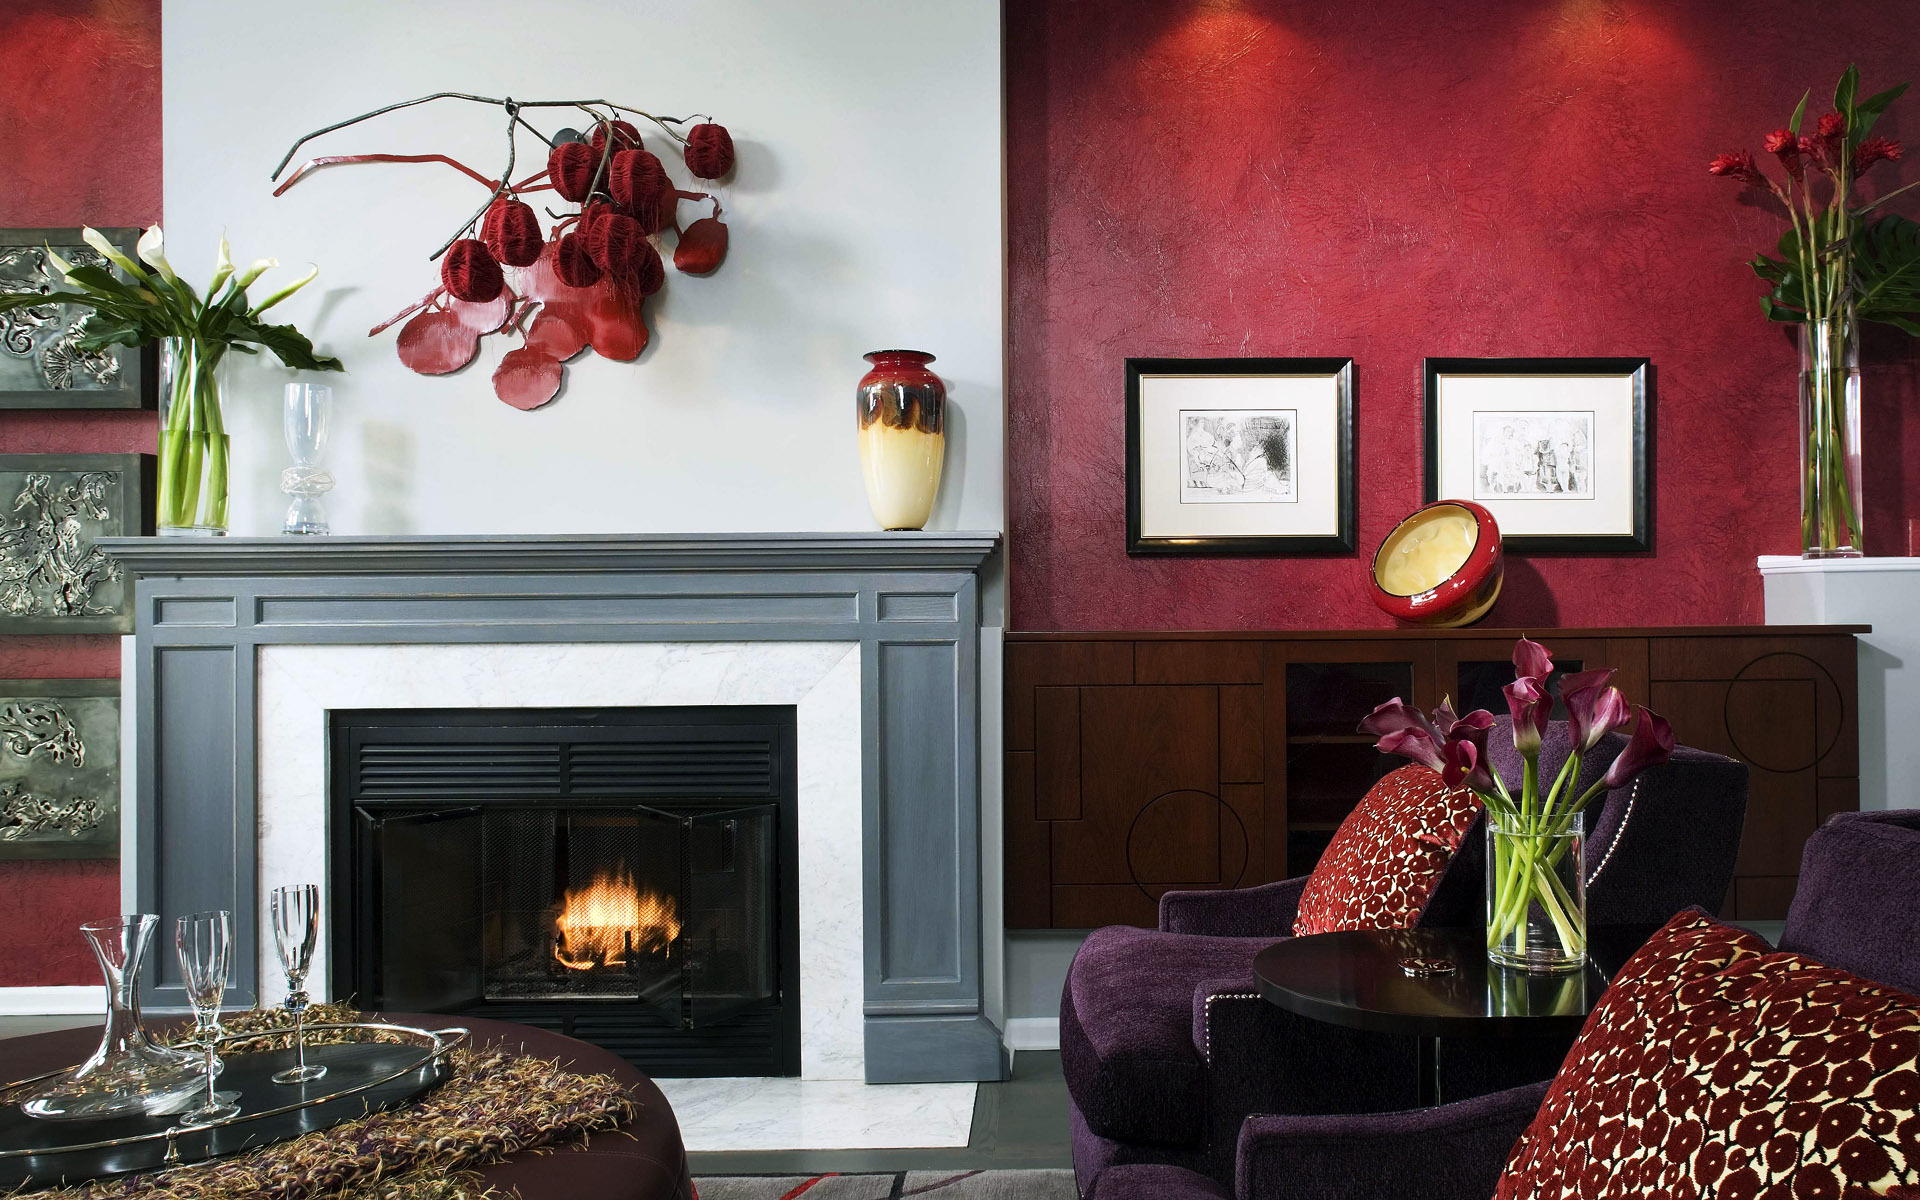 Fireplace for a stylish living room interior with red bright walls